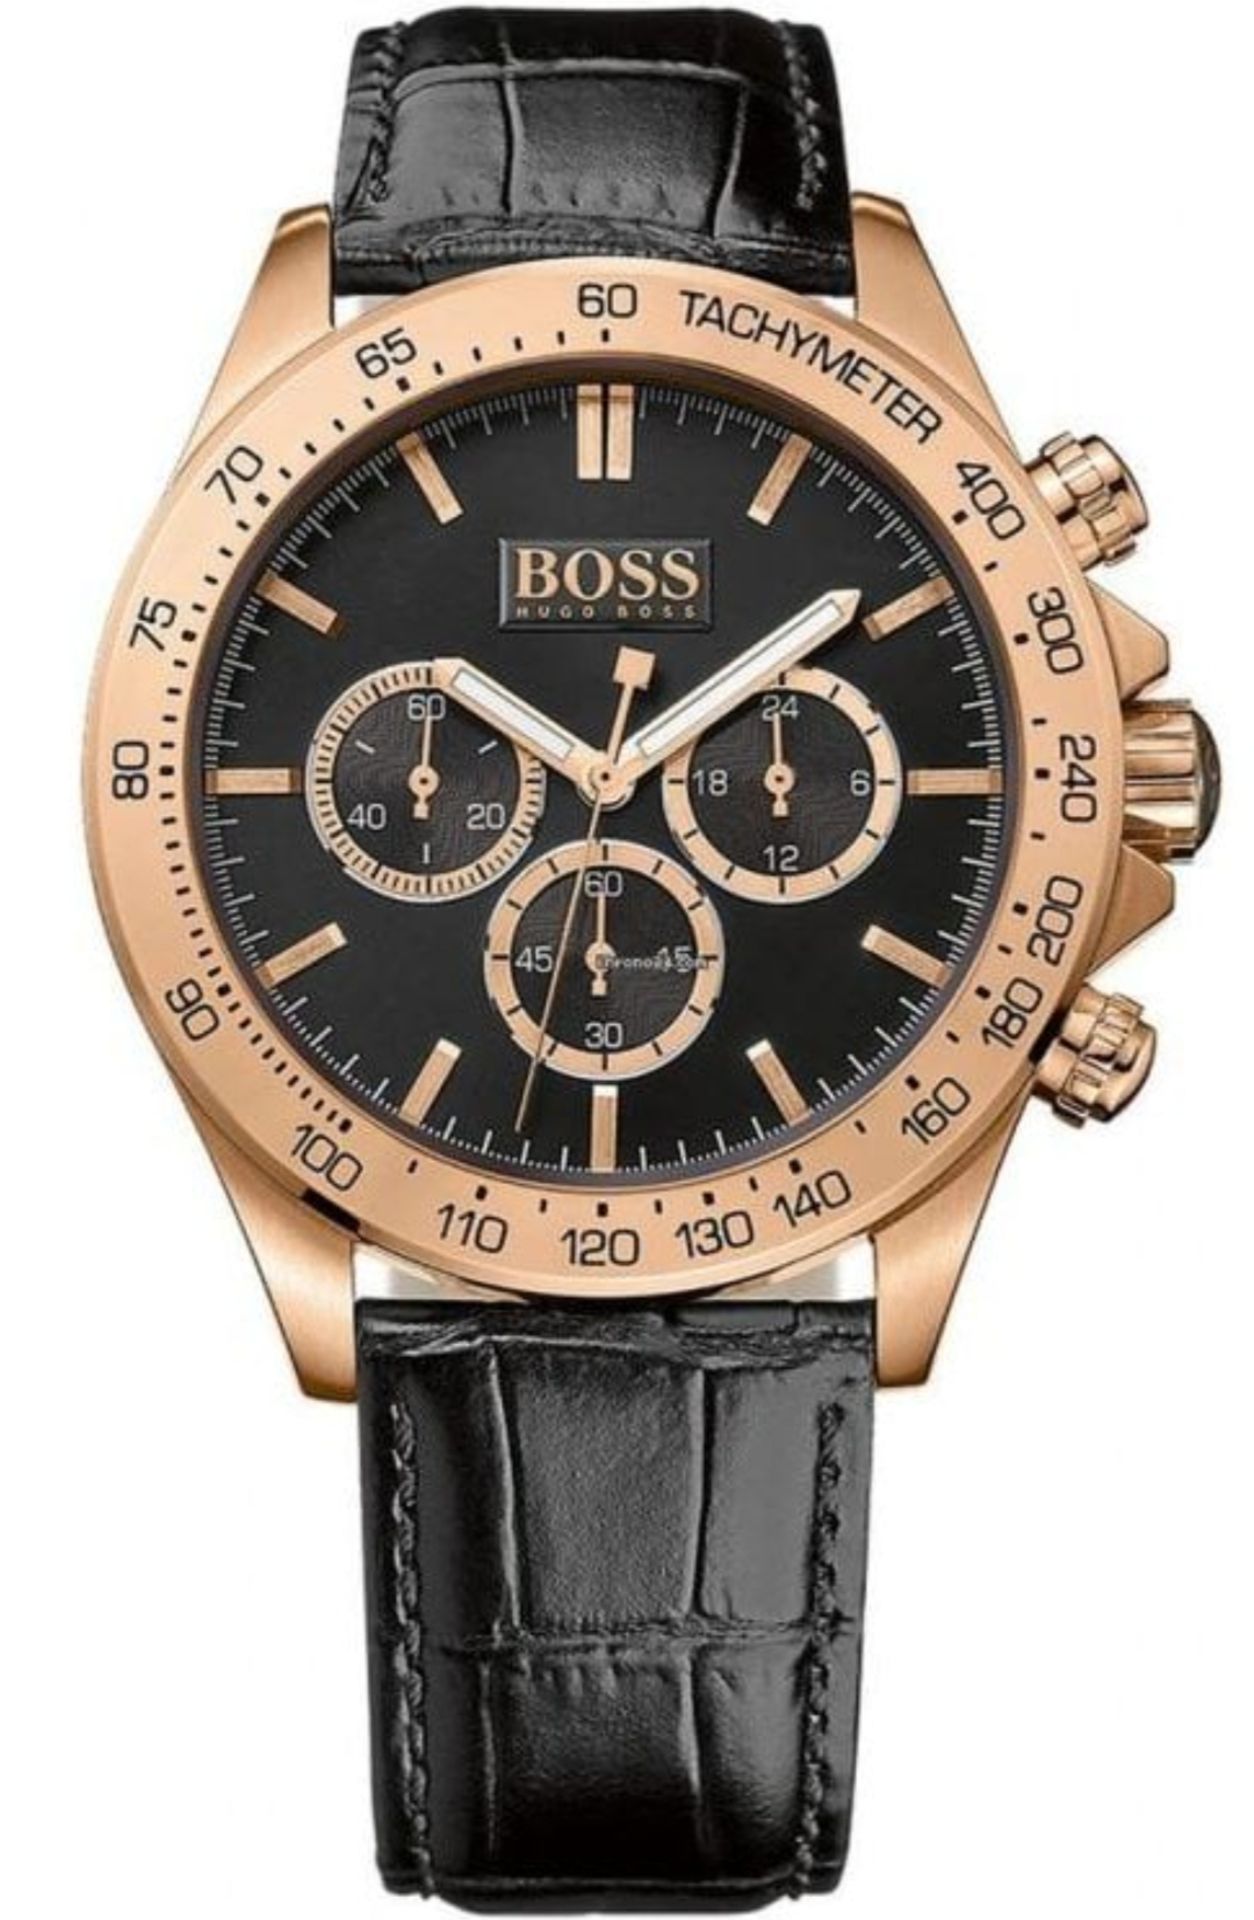 Hugo Boss Trade Lot 1C. A Total Of 20 Brand New Hugo Boss Watches - Image 6 of 20